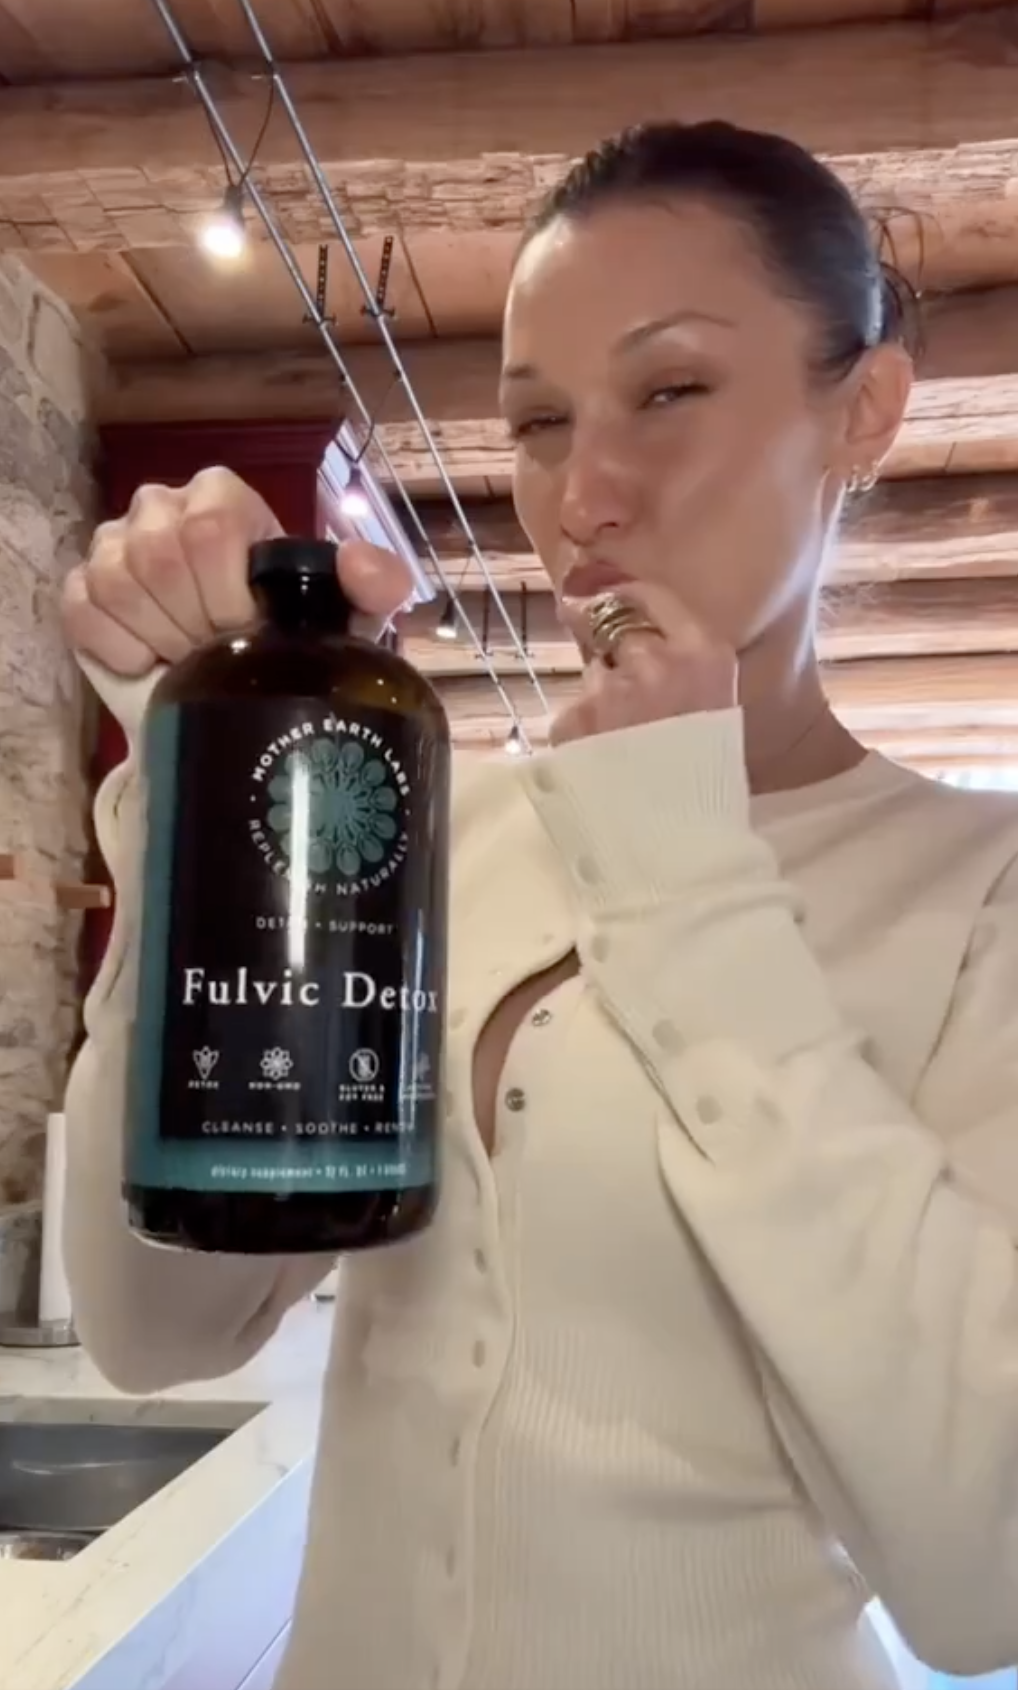 Bella holding a bottle of Fulvic Detox, with her lips pursed